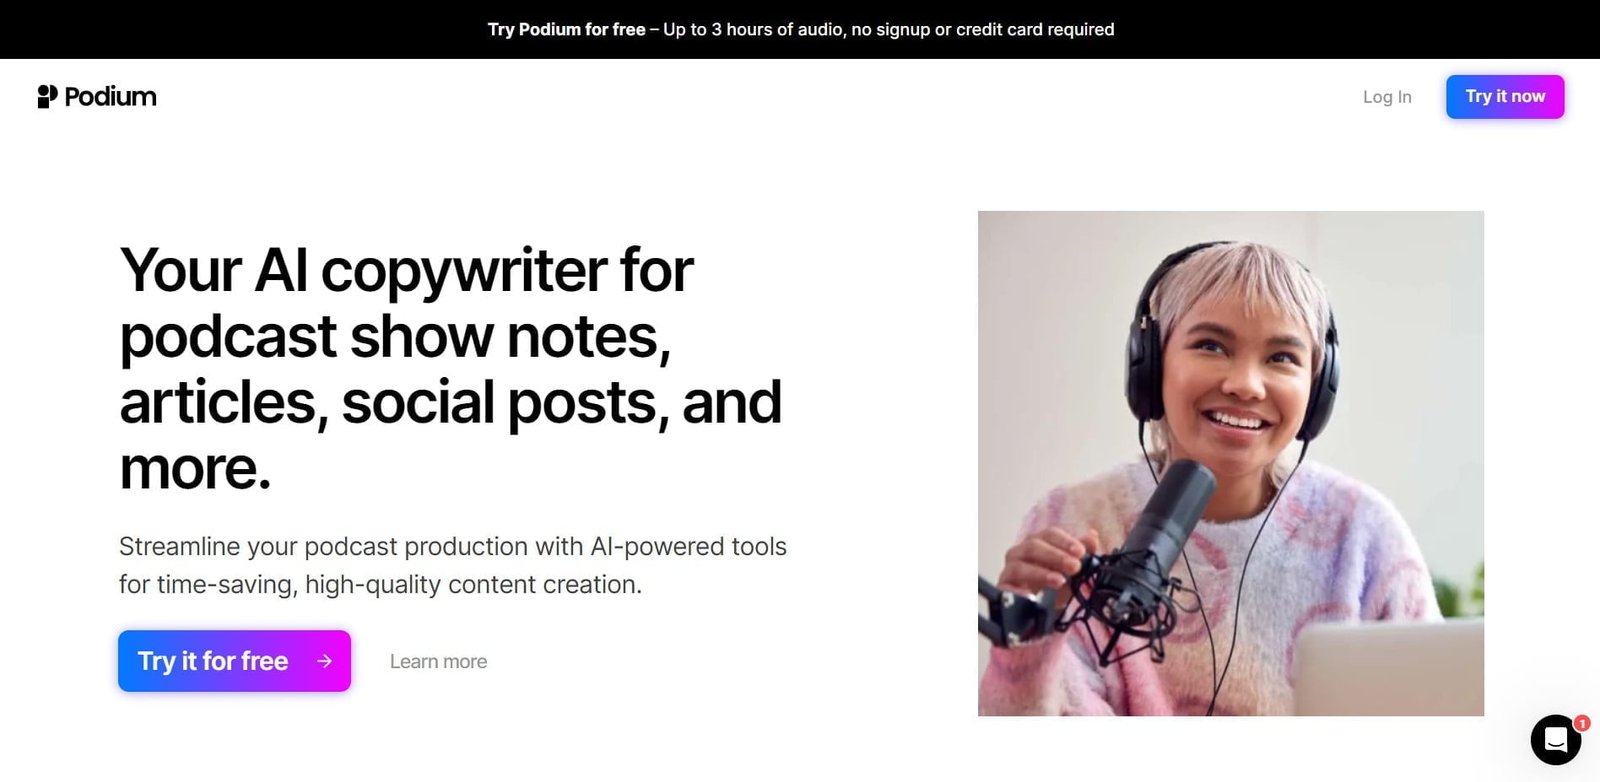 Podium is an AI copywriter designed specifically for podcasters